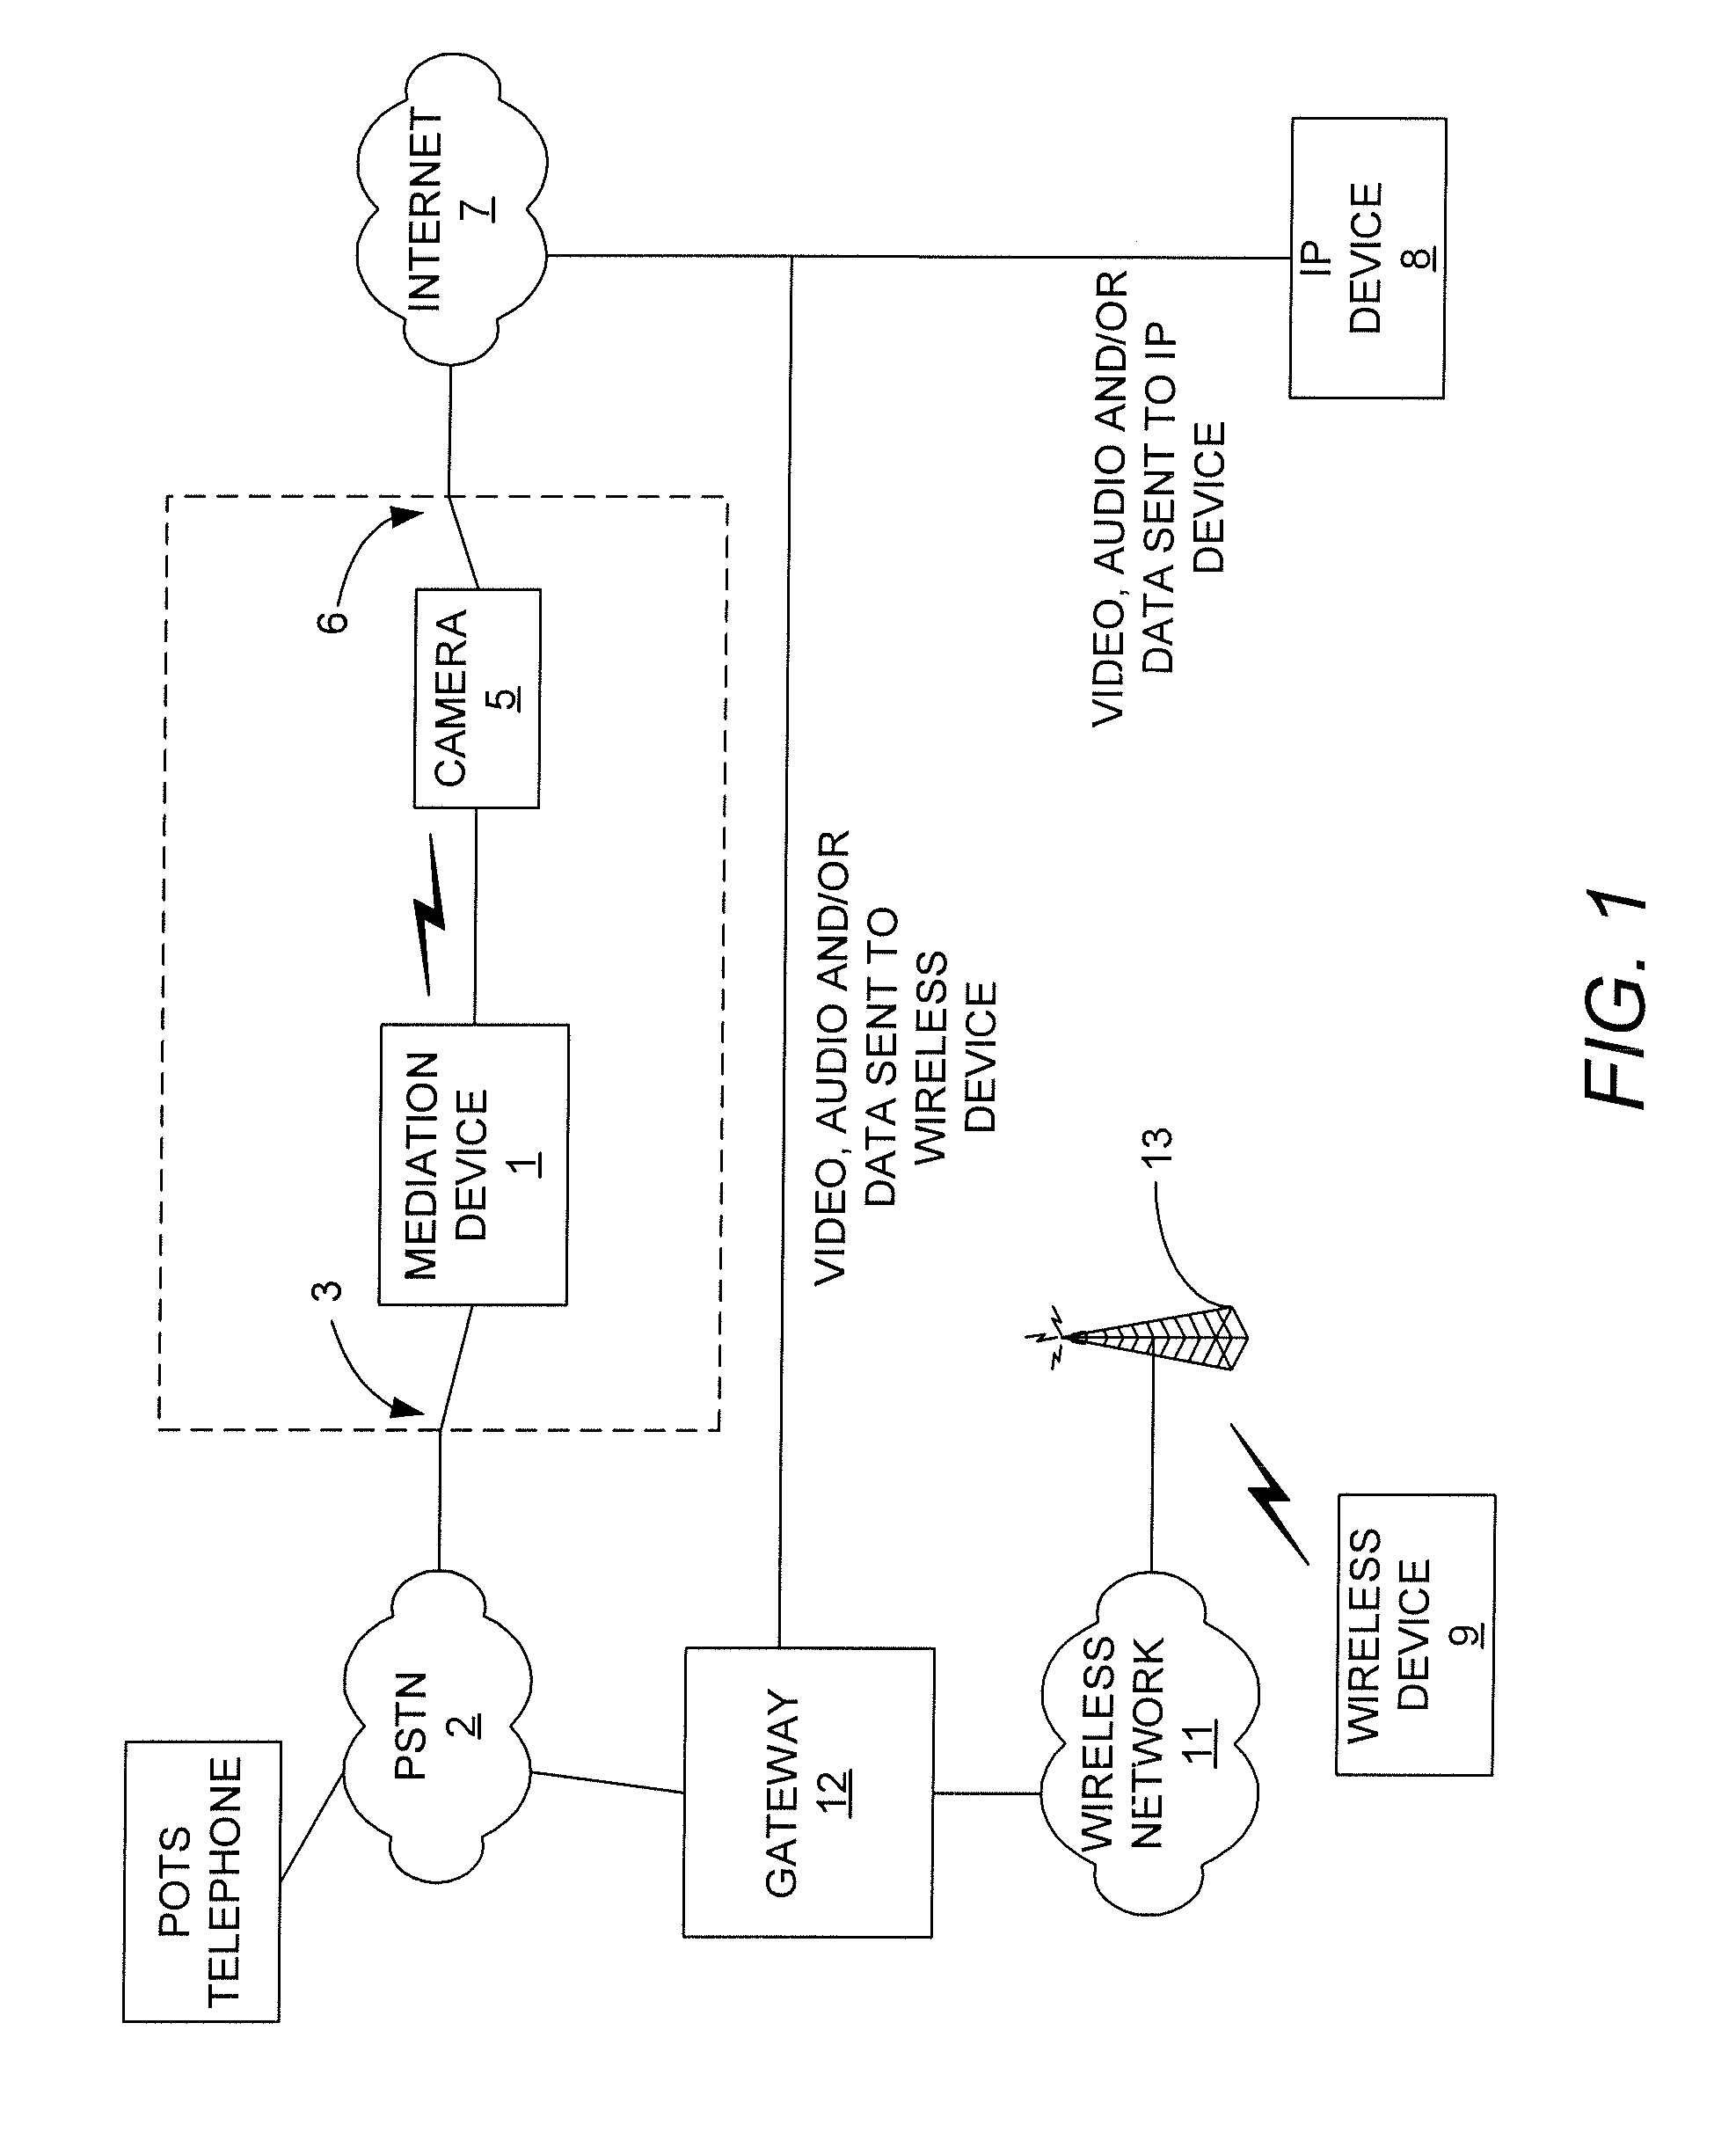 Mediation Device and Method for Remotely Controlling a Camera of a Security System Using Dual-Tone Multi-Frequency (DTMF) Signals